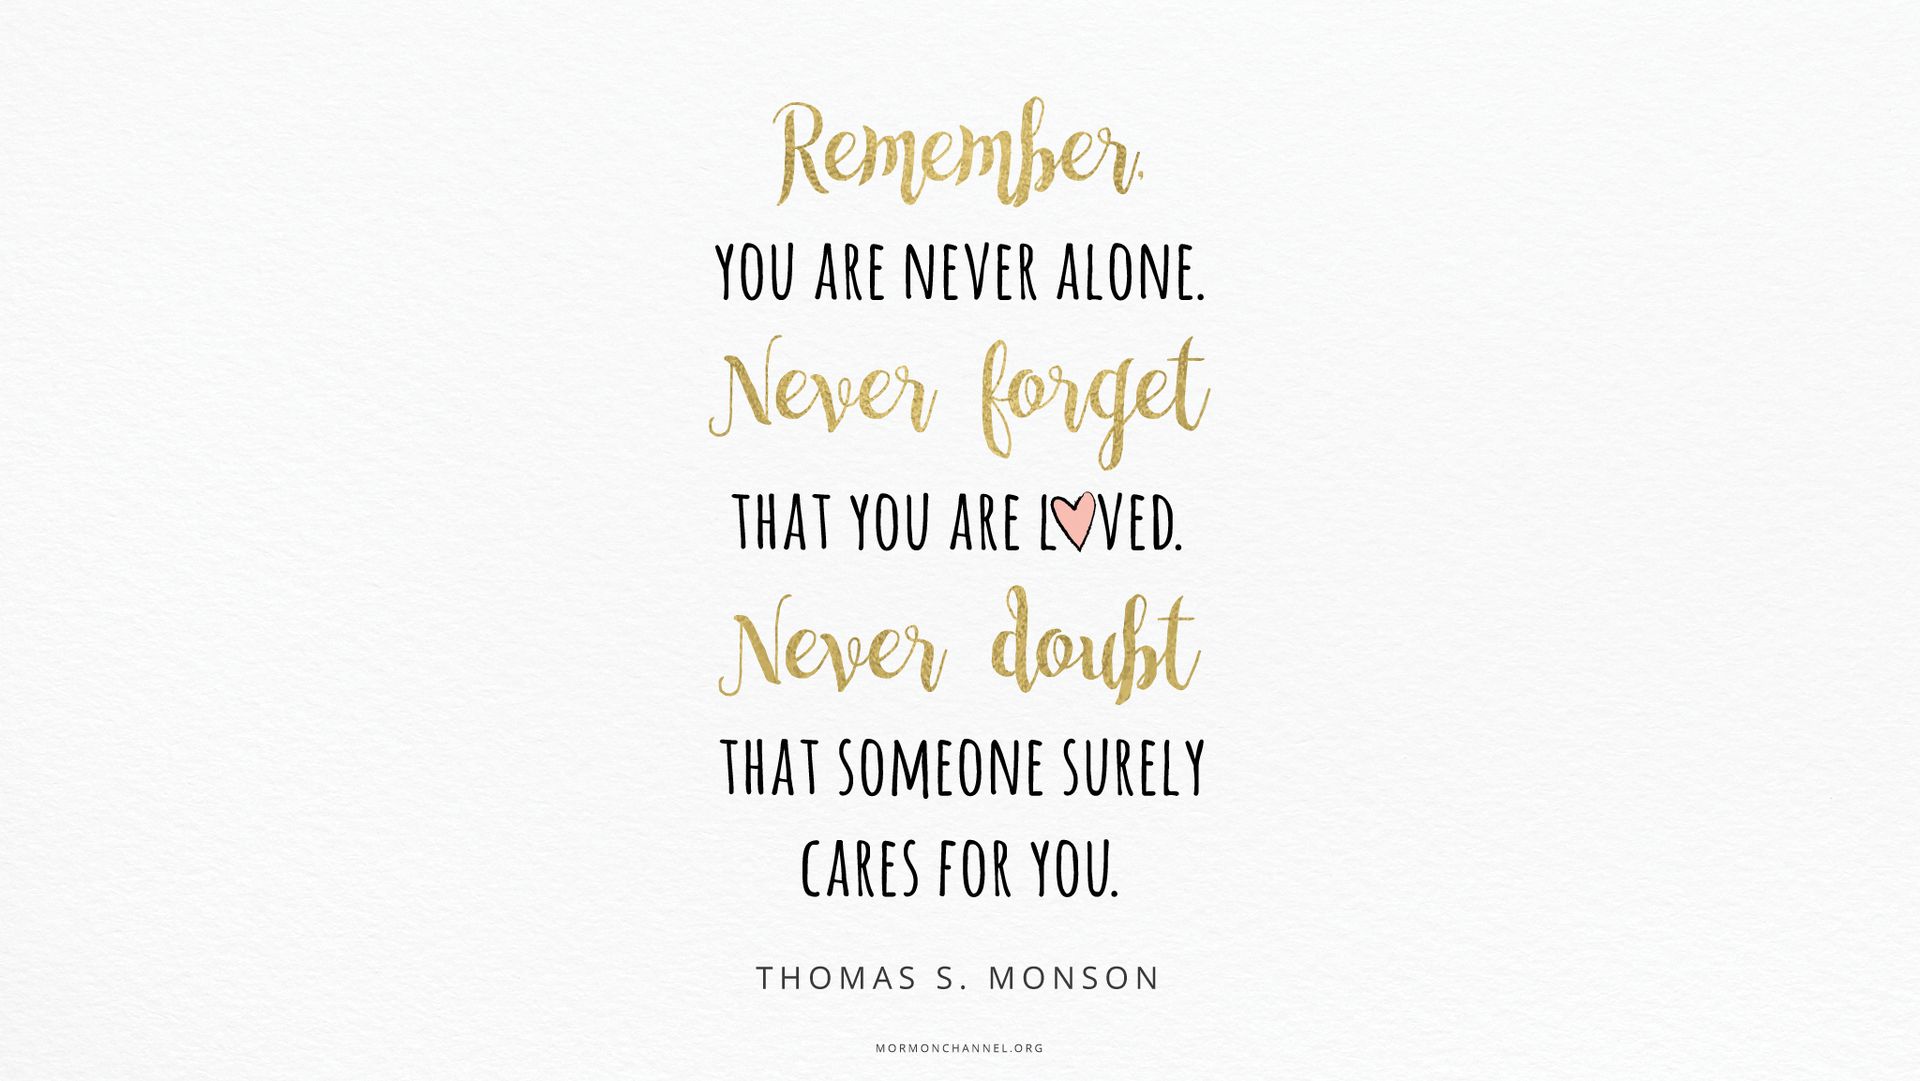 “Remember, you are never alone. Never forget that you are loved. Never doubt that someone surely cares for you.”—President Thomas S. Monson, “A Time to Choose”